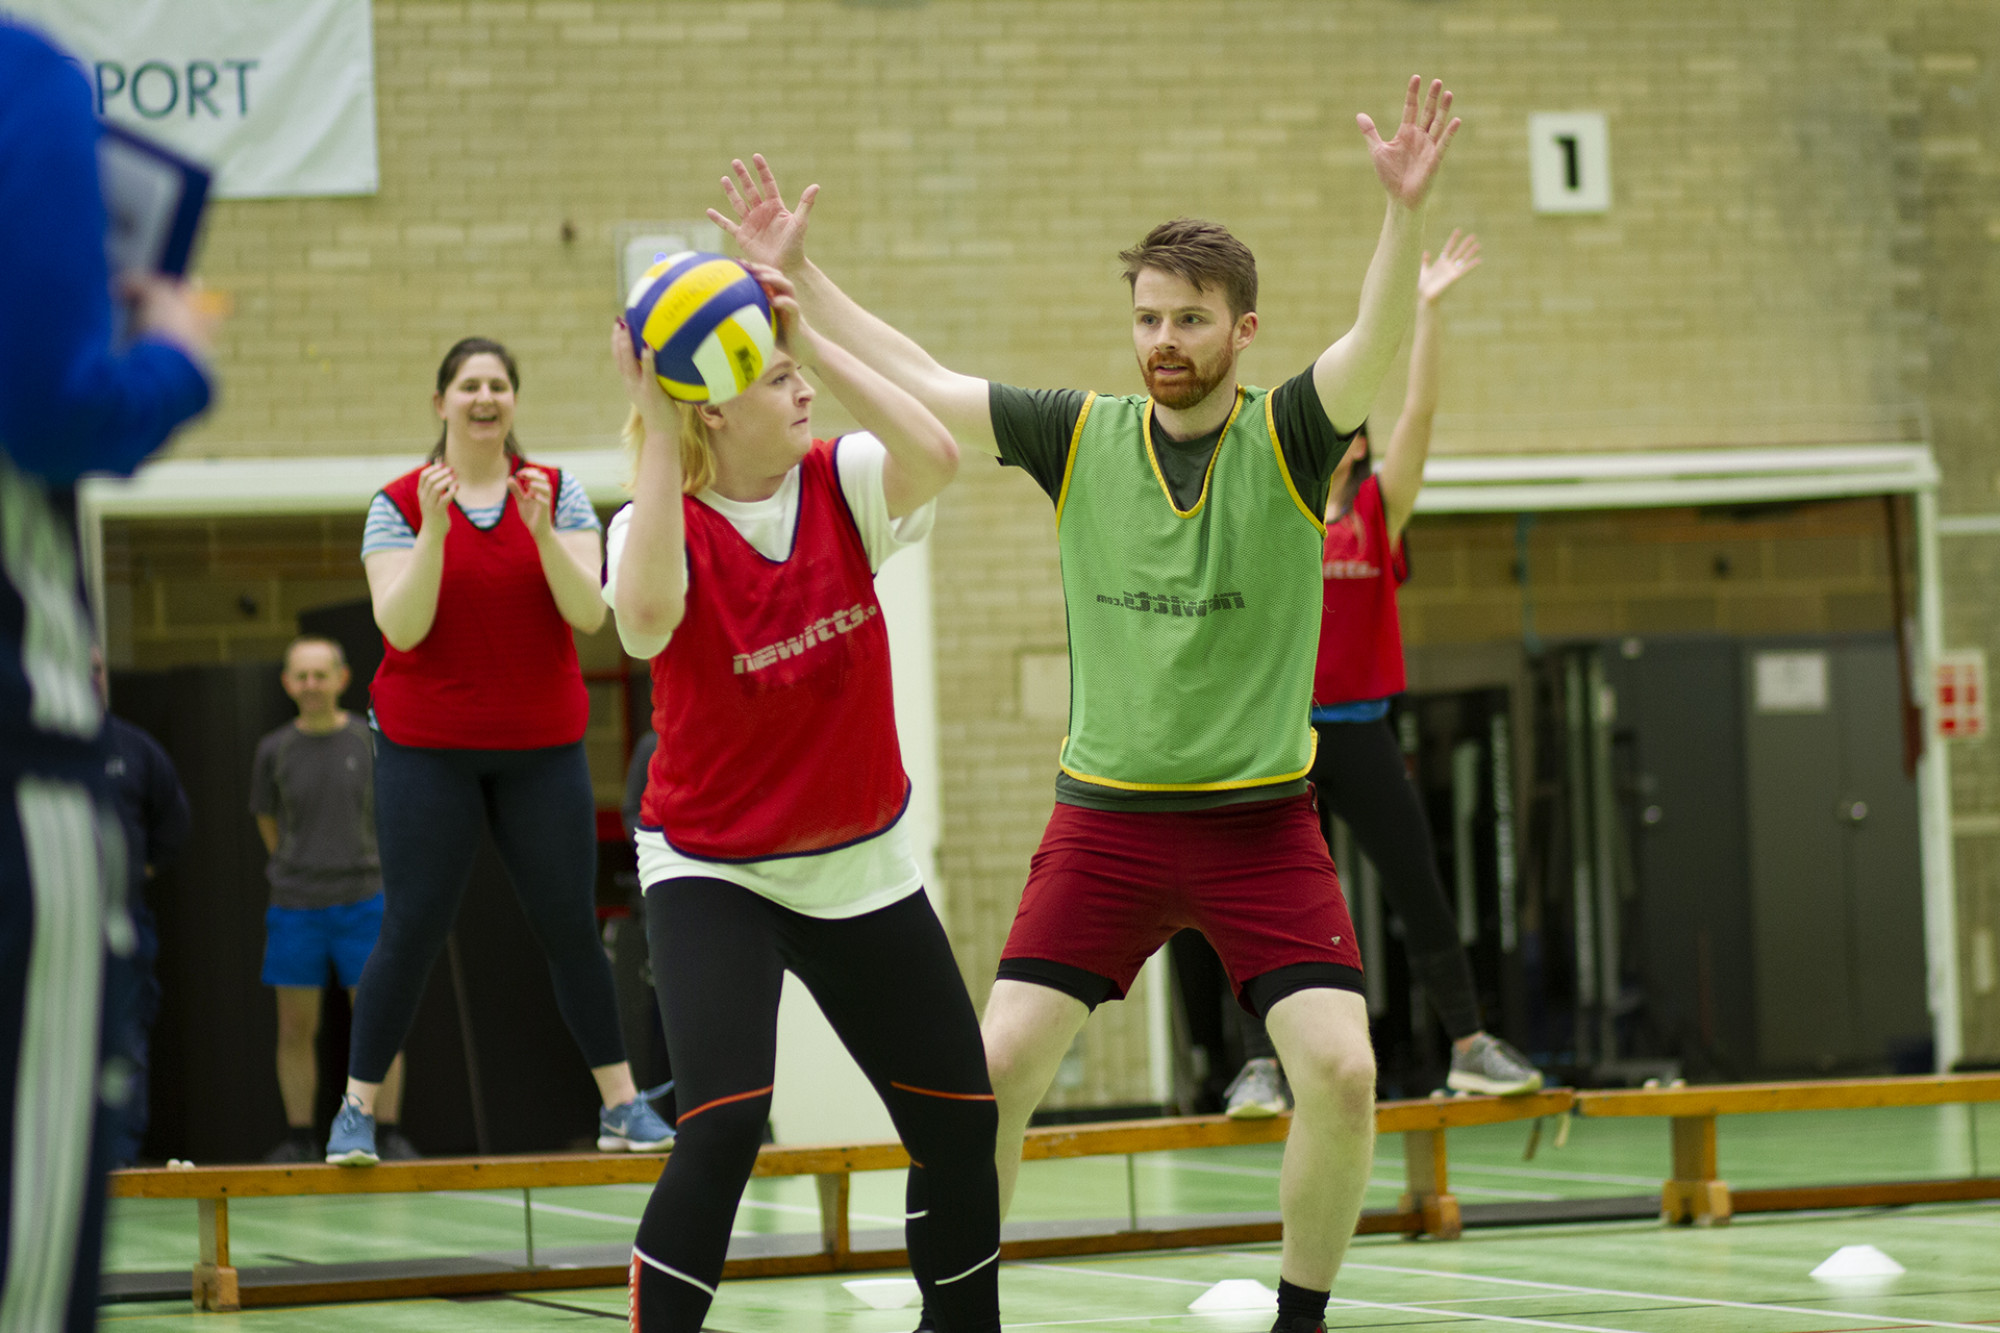 Woman playing netball about to pass the ball while man holds arms up to block the pass